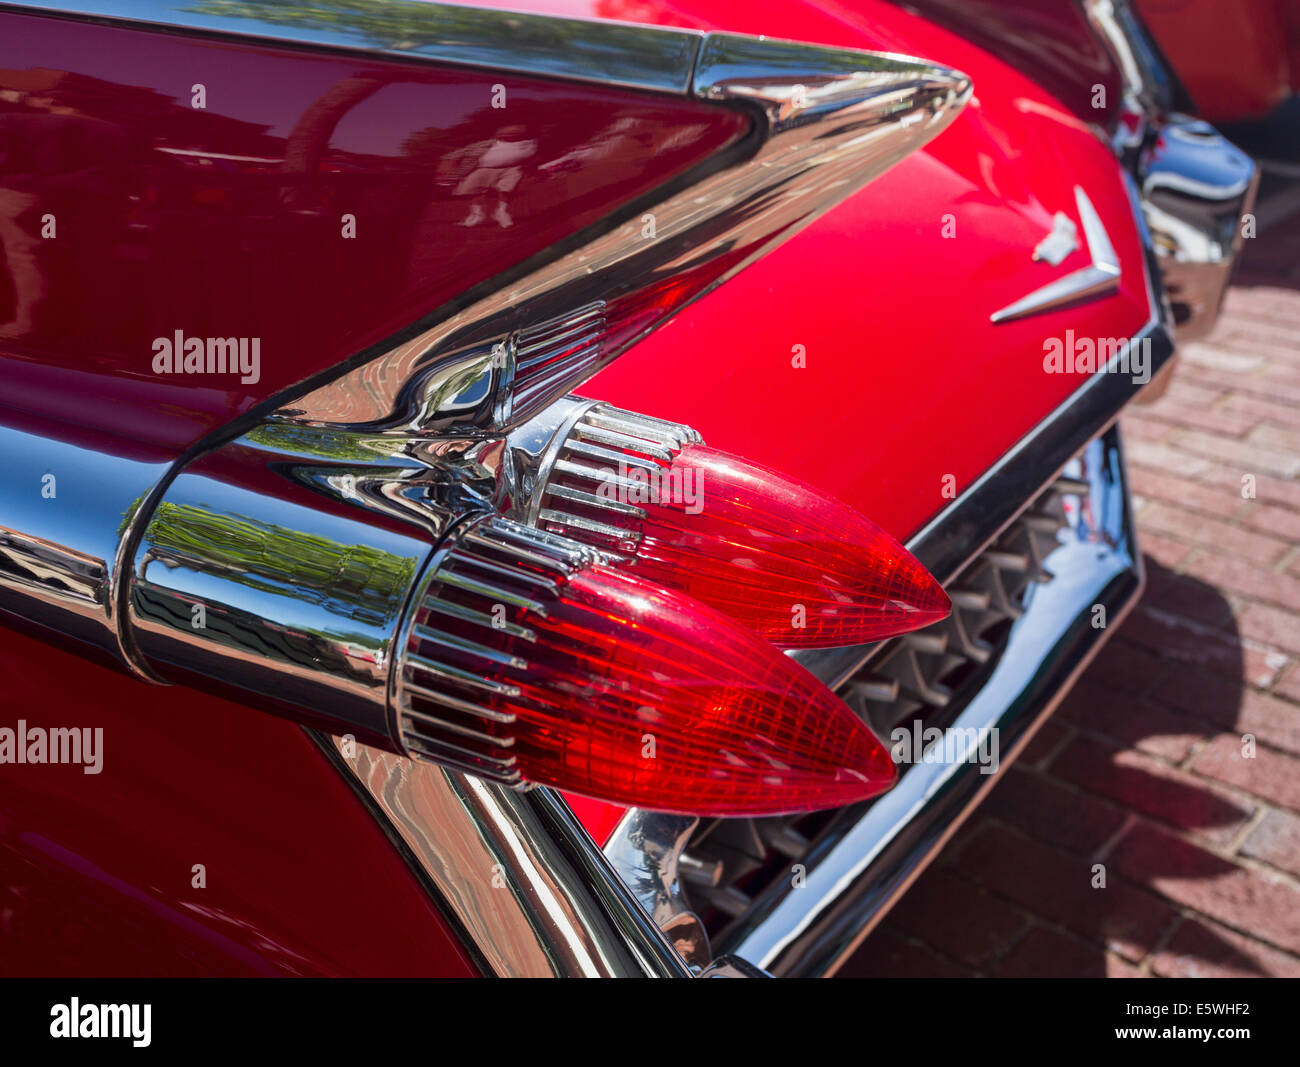 Tail lights and fins of 1959 red Cadillac Eldorado antique classic car, USA Stock Photo